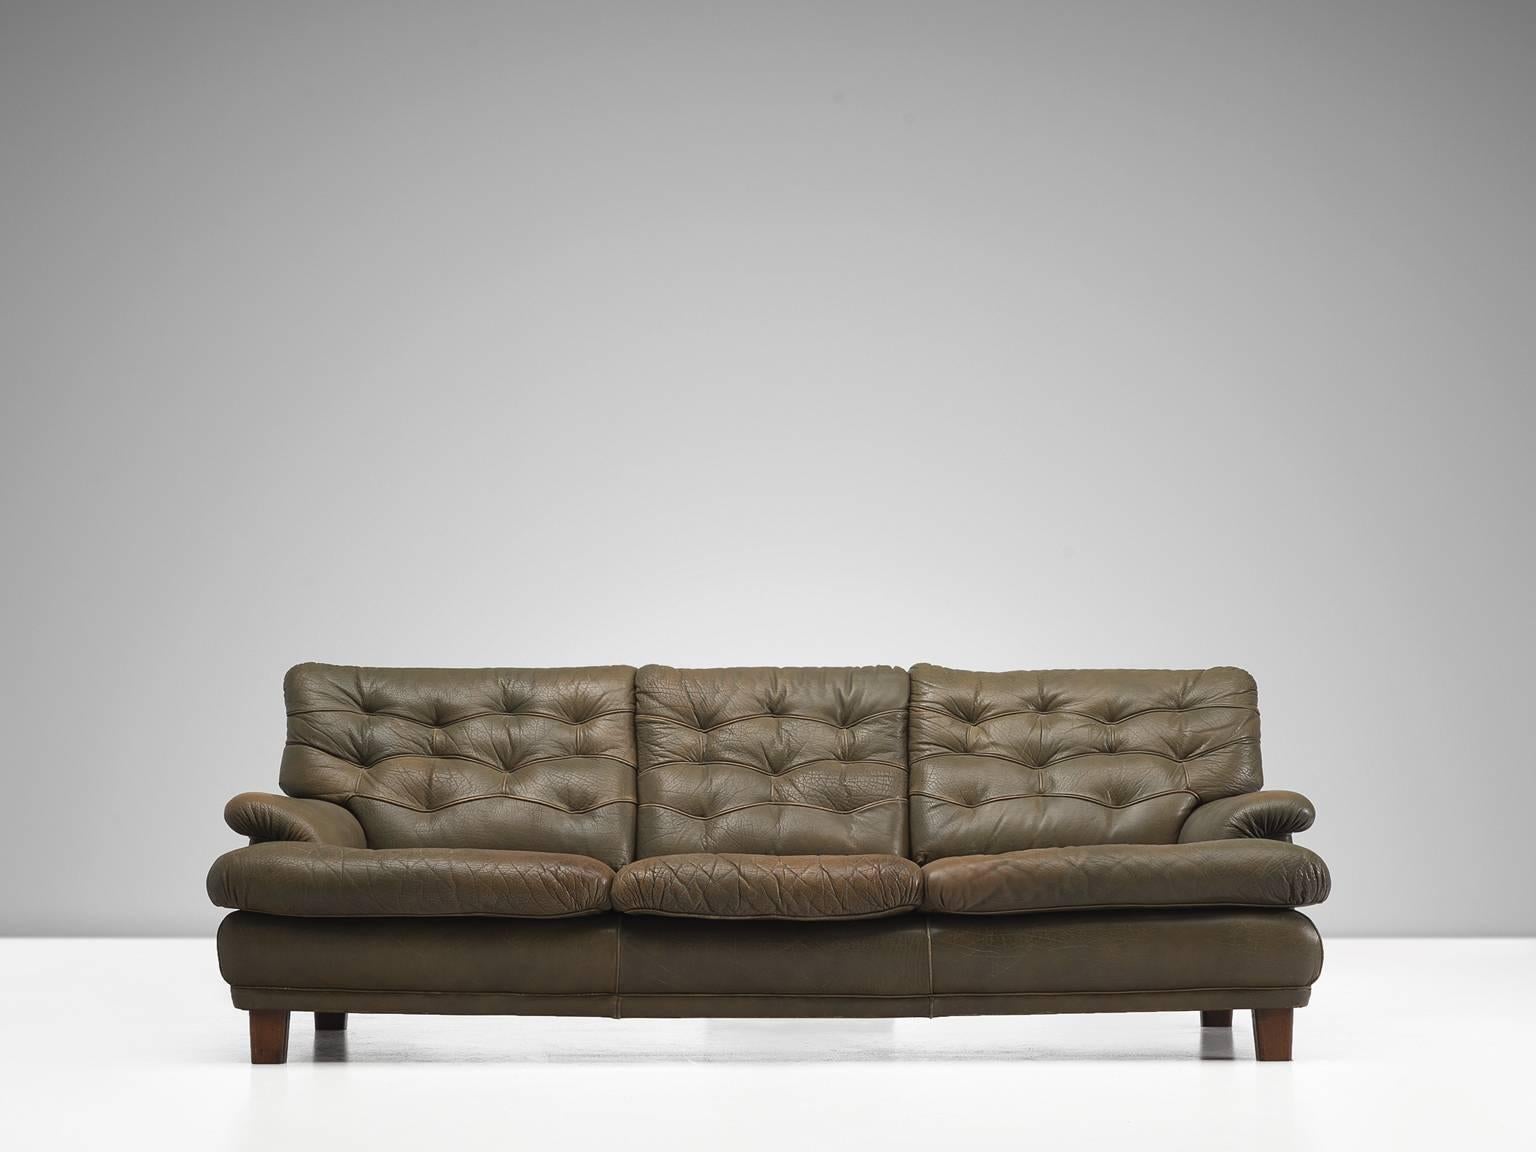 Scandinavian Modern Arne Norell Three-Seat Sofa in Patinated Olive Green Leather